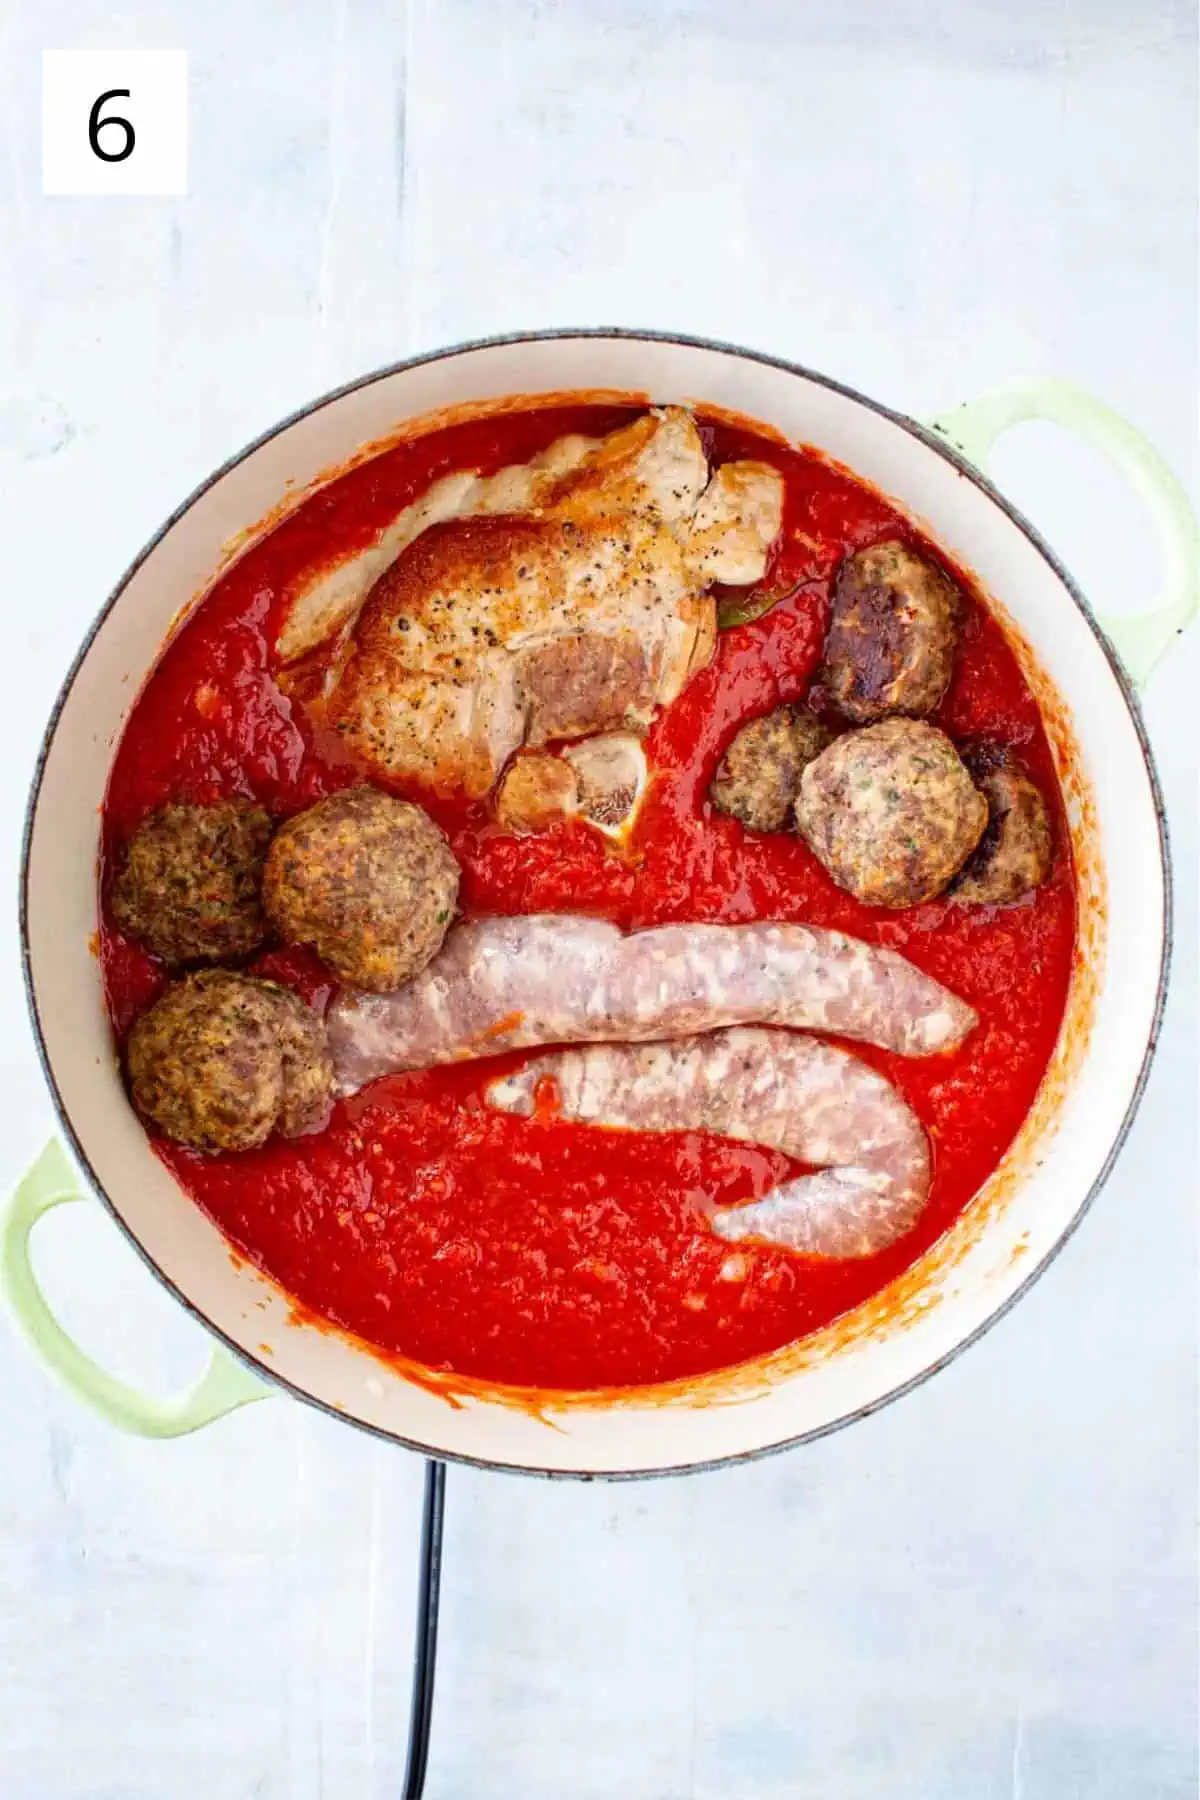 Italian sausage, meatballs and pork loin being added to a pot of red gravy.